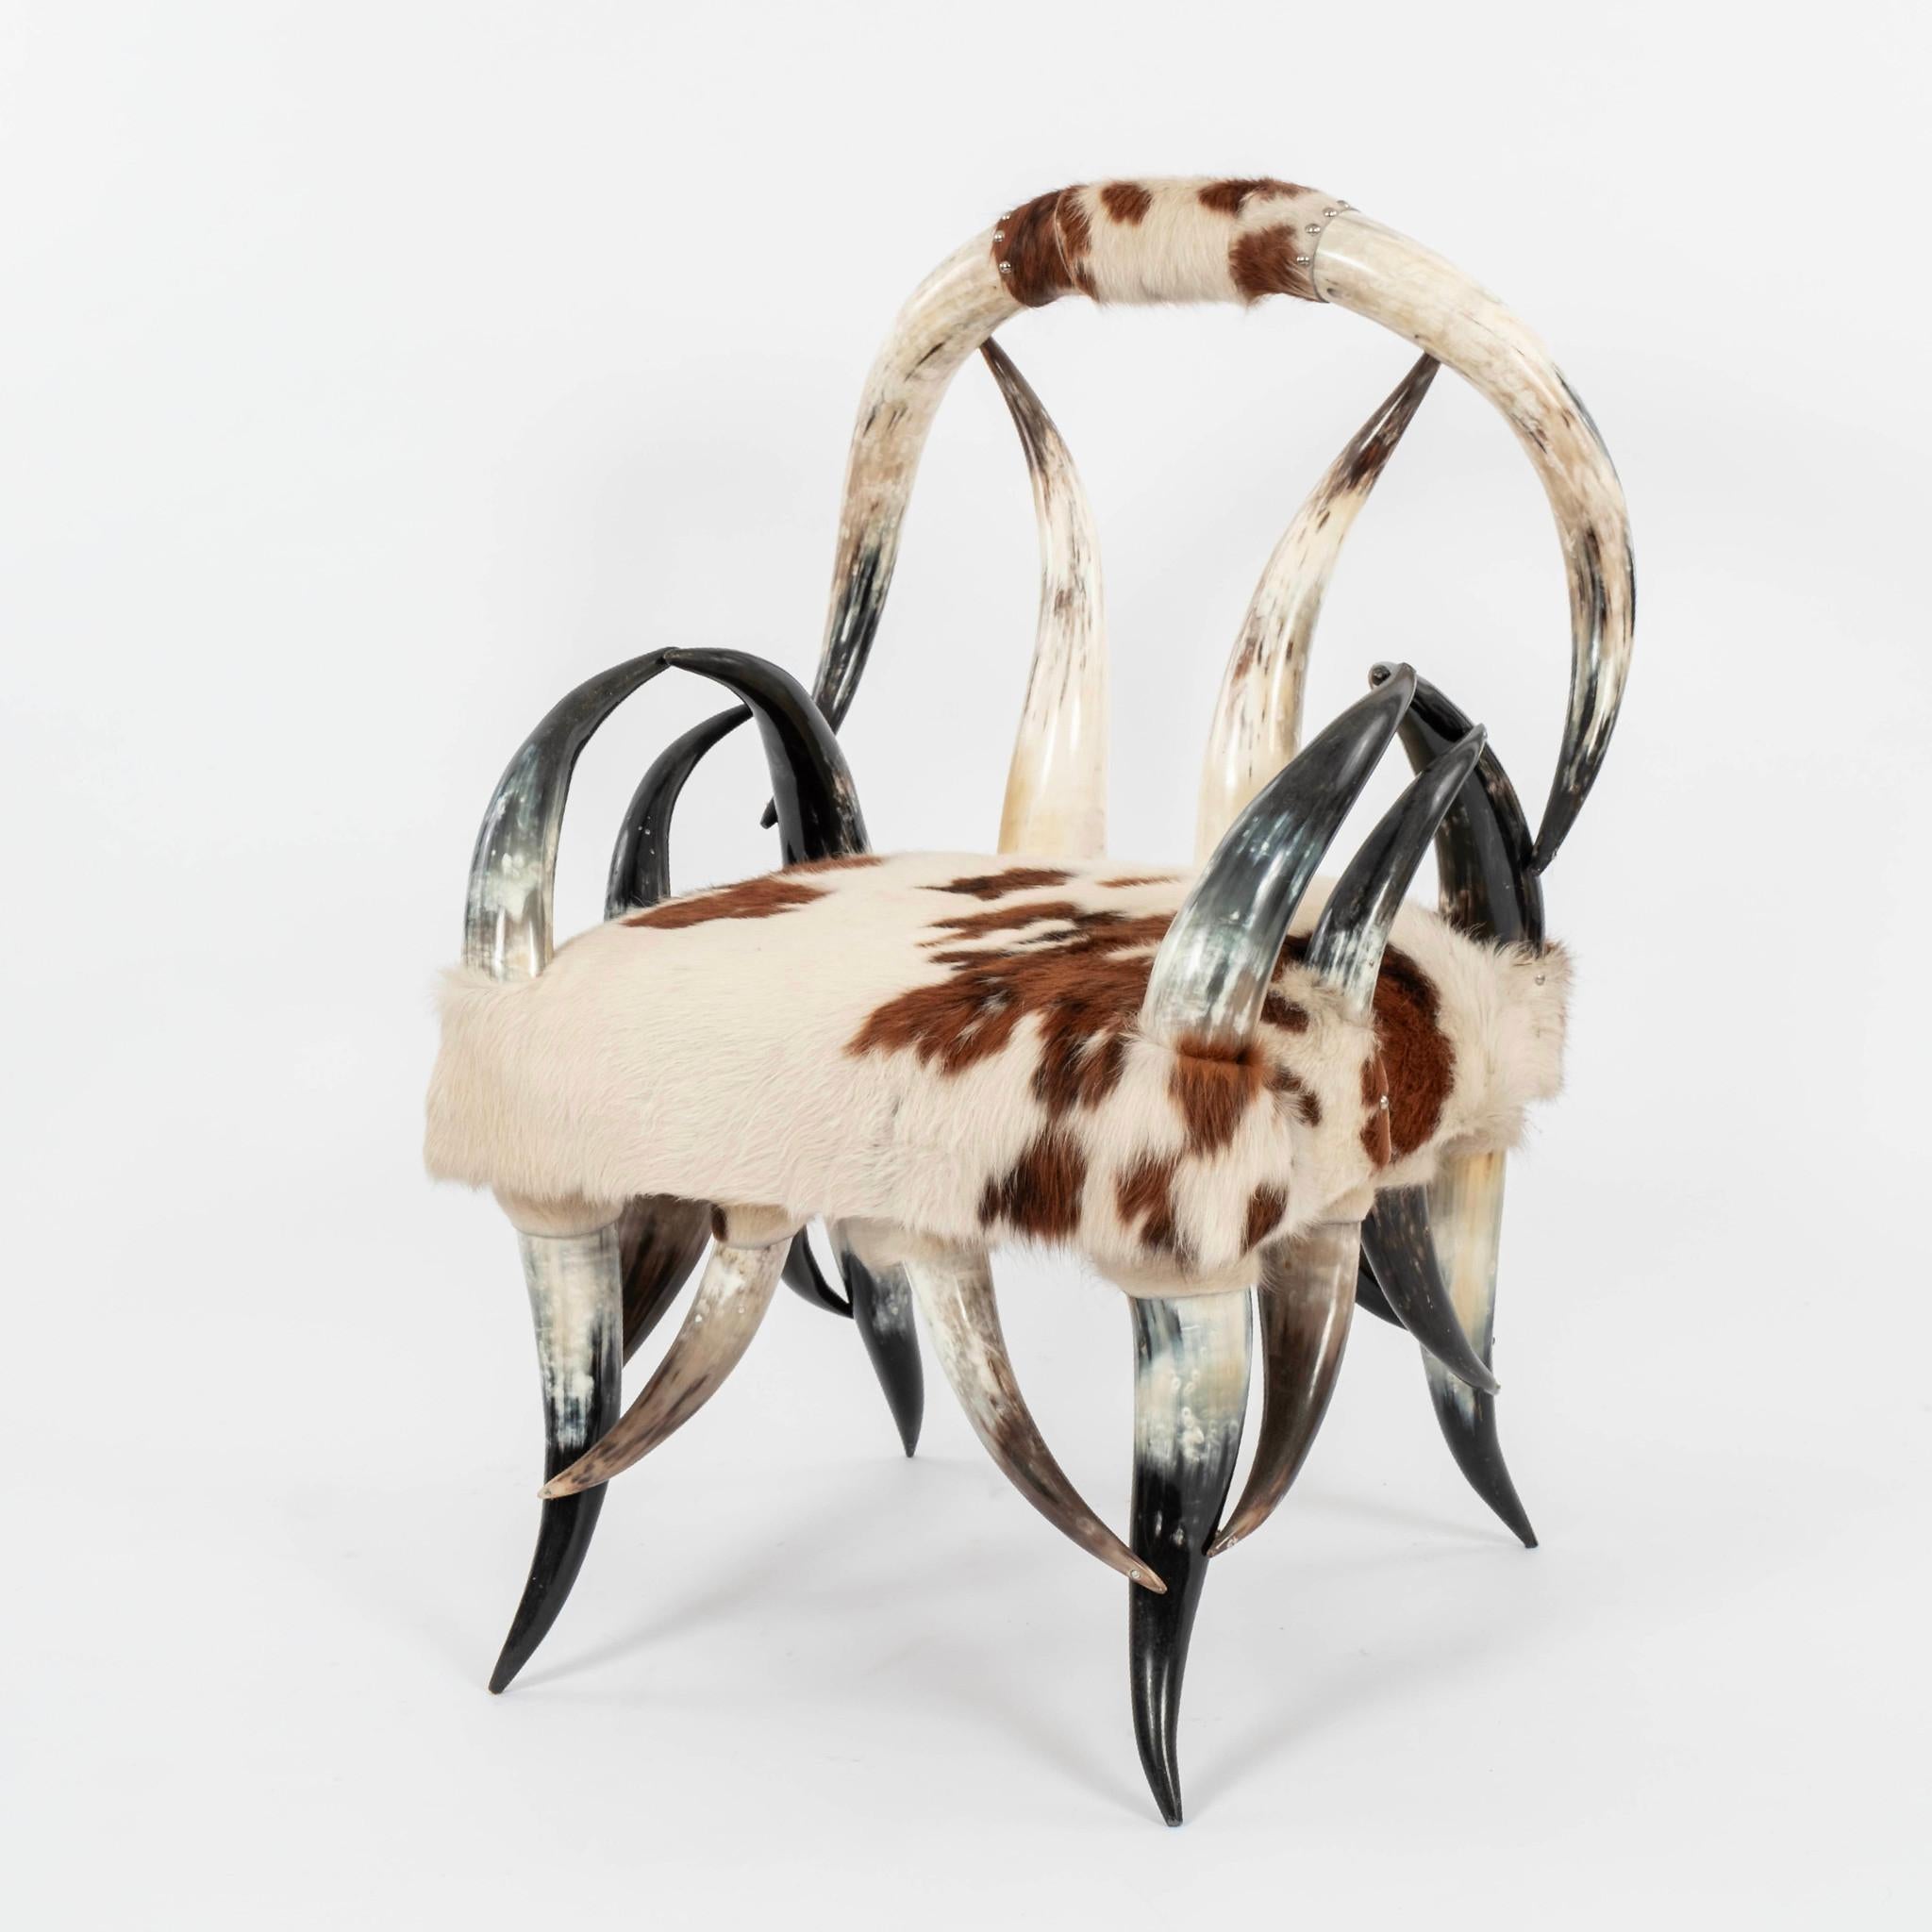 21st Century horn chair upholstered in a brown and white cowhide.